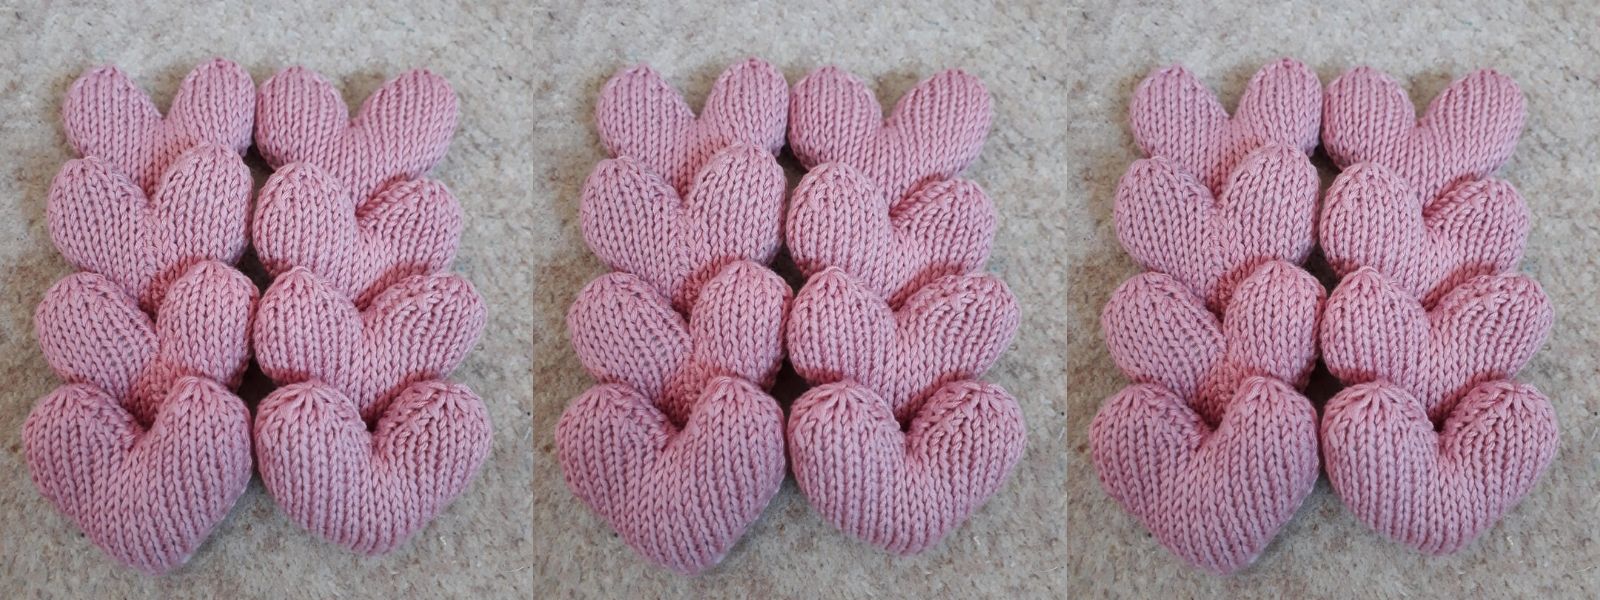 Pink knitted hearts